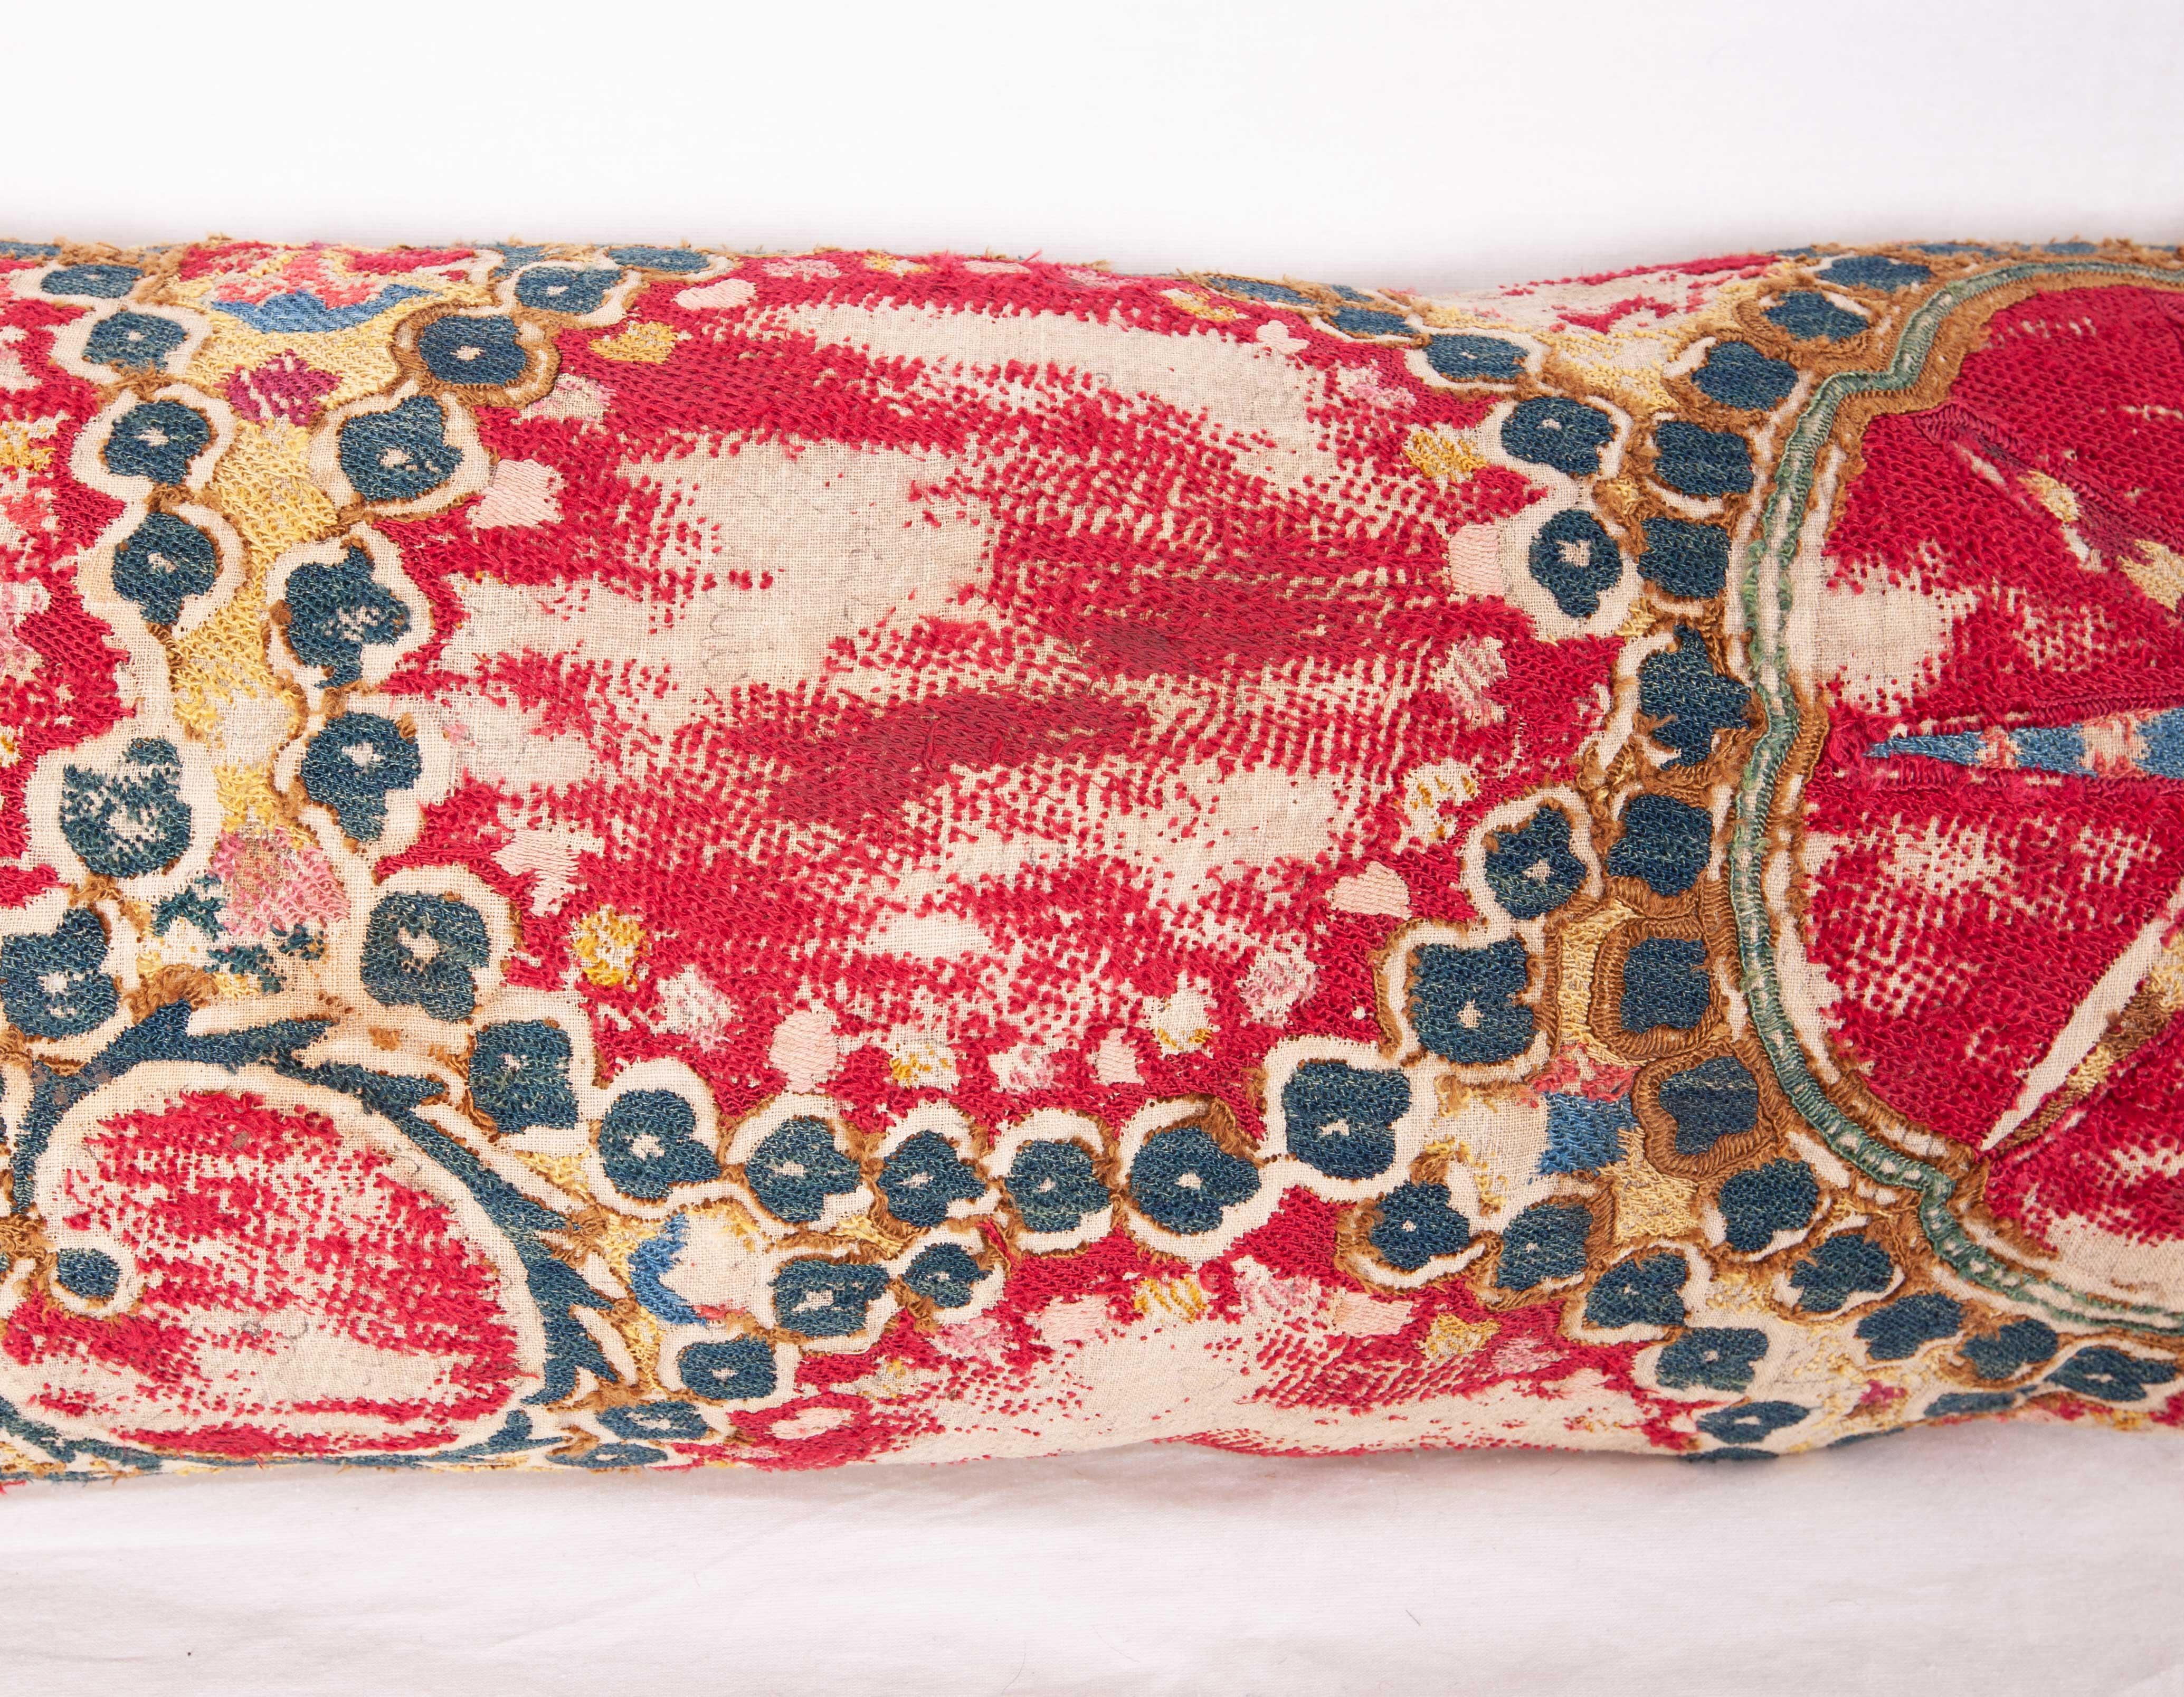 Uzbek Antique Suzani Pillow or Cushion Cover Fashioned from a 19th Century Suzani